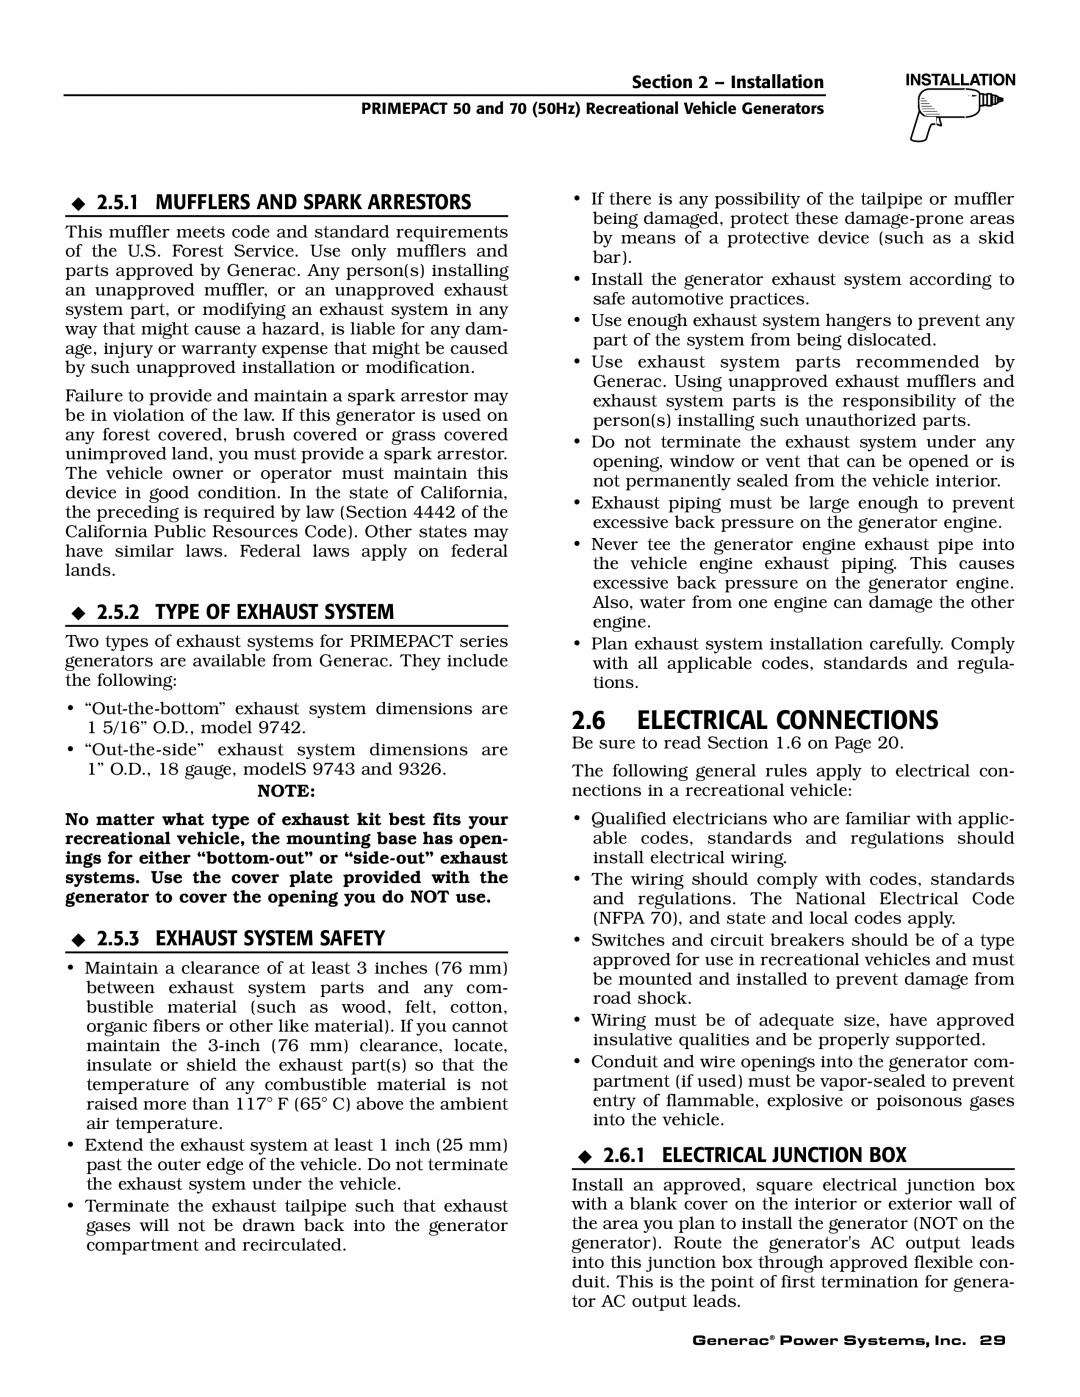 Generac 00784-2, 09290-4 owner manual Electrical Connections, Mufflers And Spark Arrestors, Type Of Exhaust System 